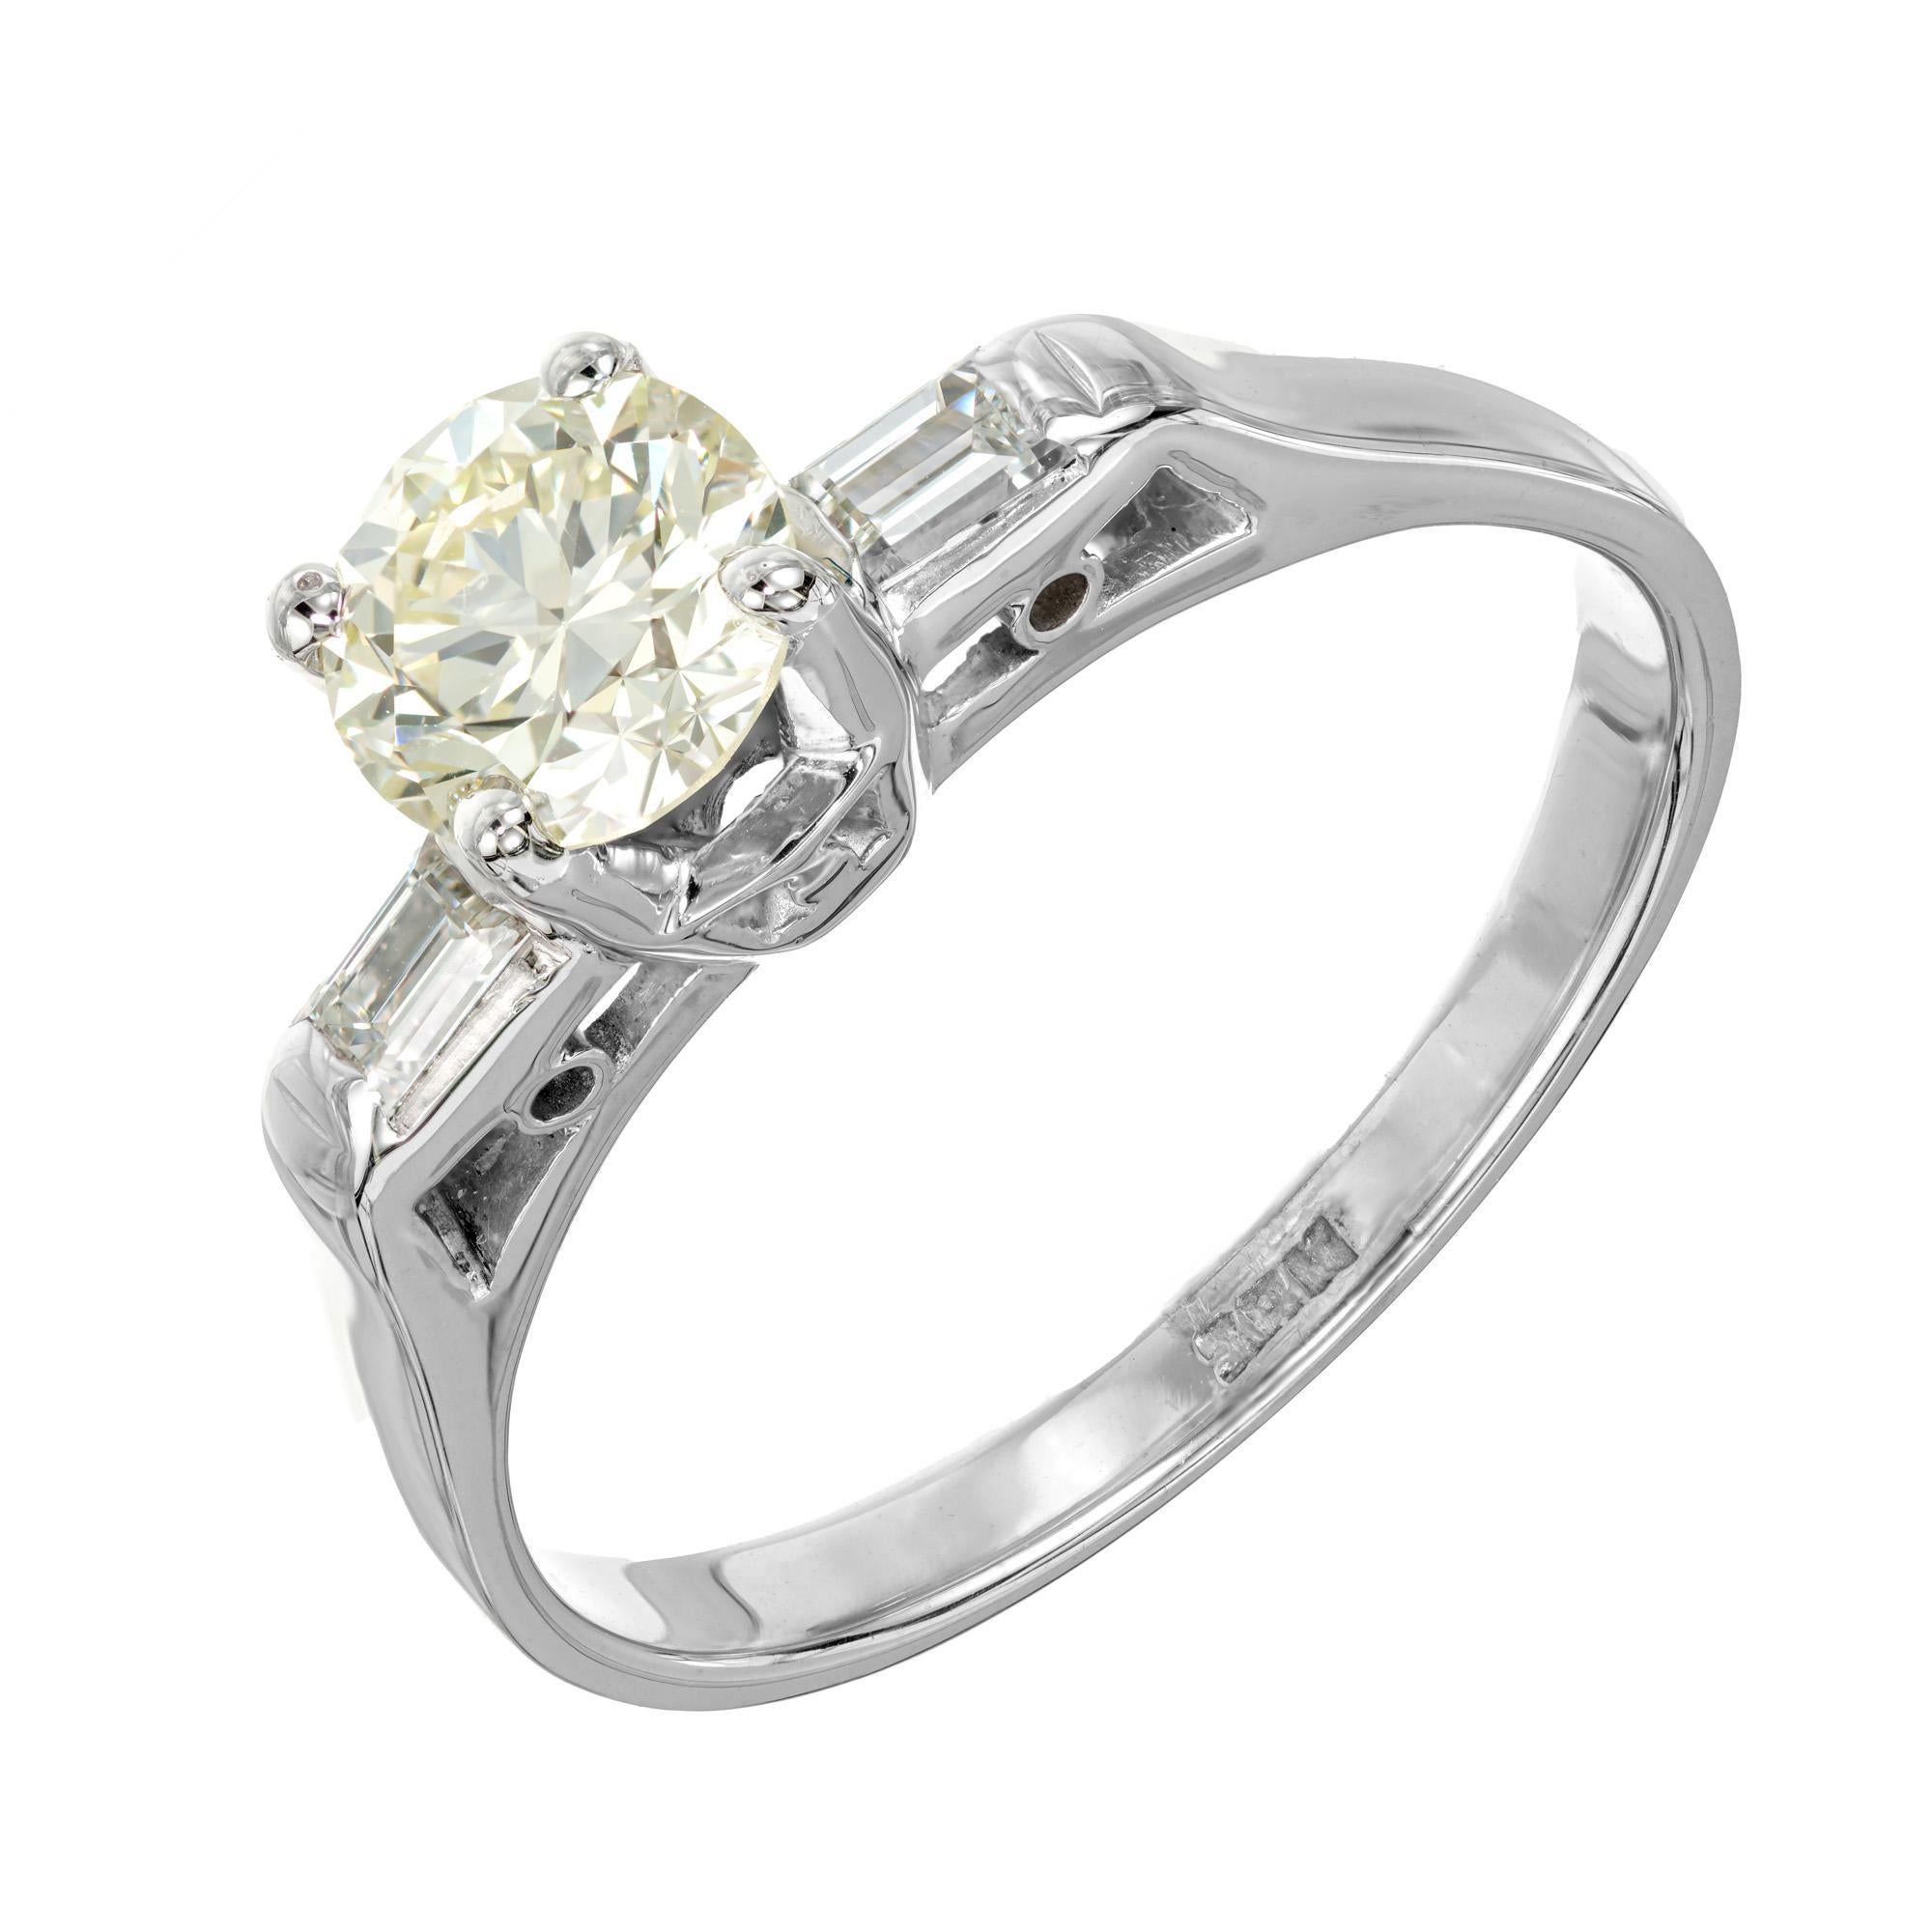 1920's Art Deco round diamond engagement ring. GIA certified .78 round brilliant cut light yellow center stone accented by two step cut baguette diamonds in a 18k white gold setting. 

1 round brilliant cut U-V VVS2 diamond, Approximate .78cts GIA 